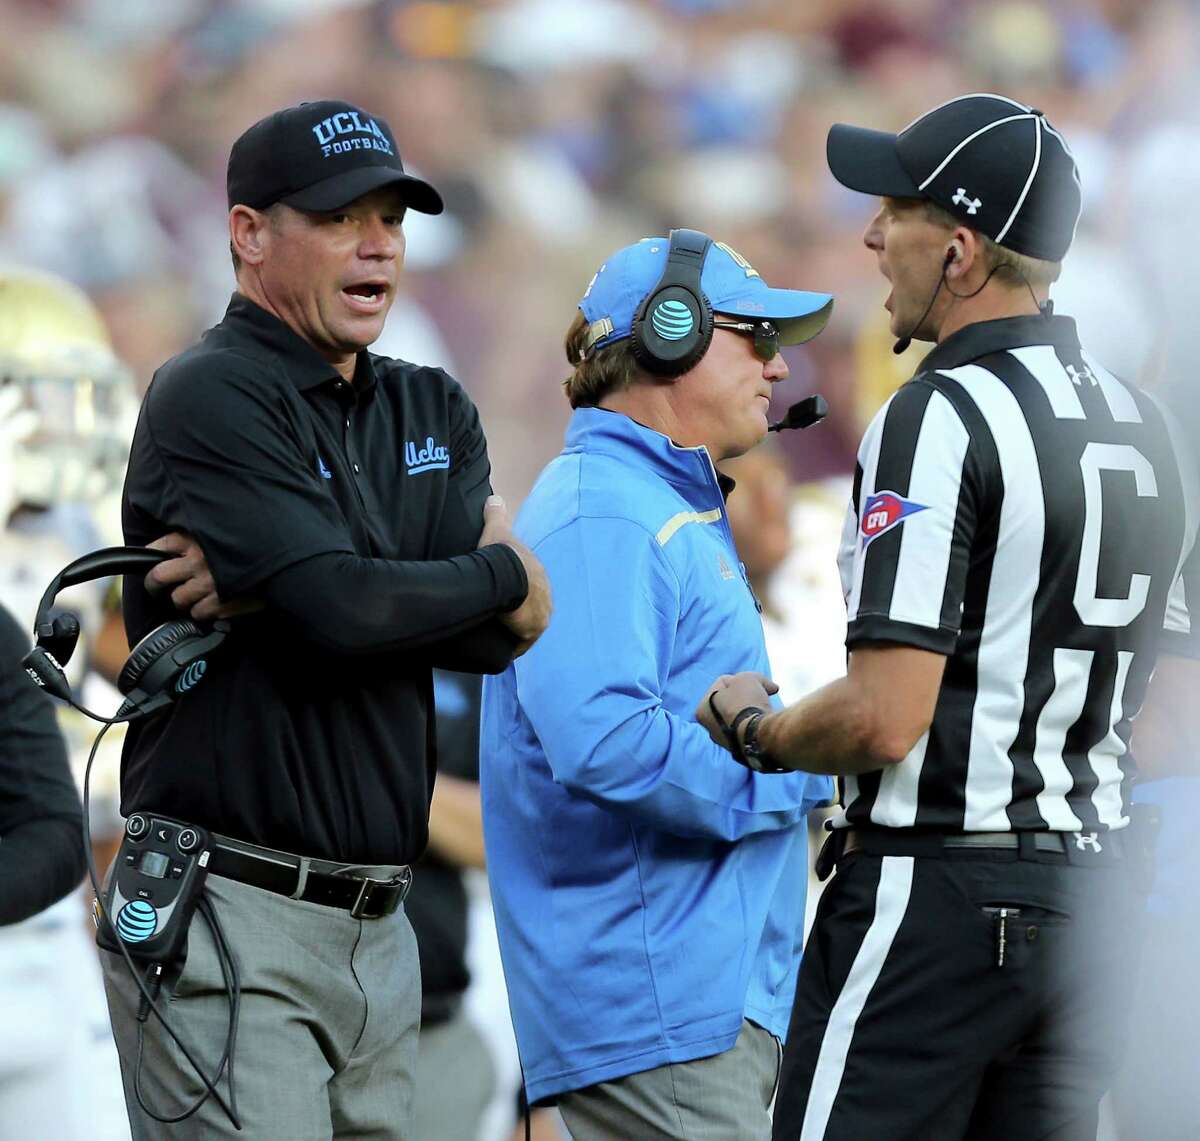 UCLA coach Jim Mora discusses a call with an official during overtime of an NCAA college football game against Texas A&M on Saturday, Sept. 3, 2016, in College Station, Texas. Texas A&M won 31-24. (AP Photo/Sam Craft)